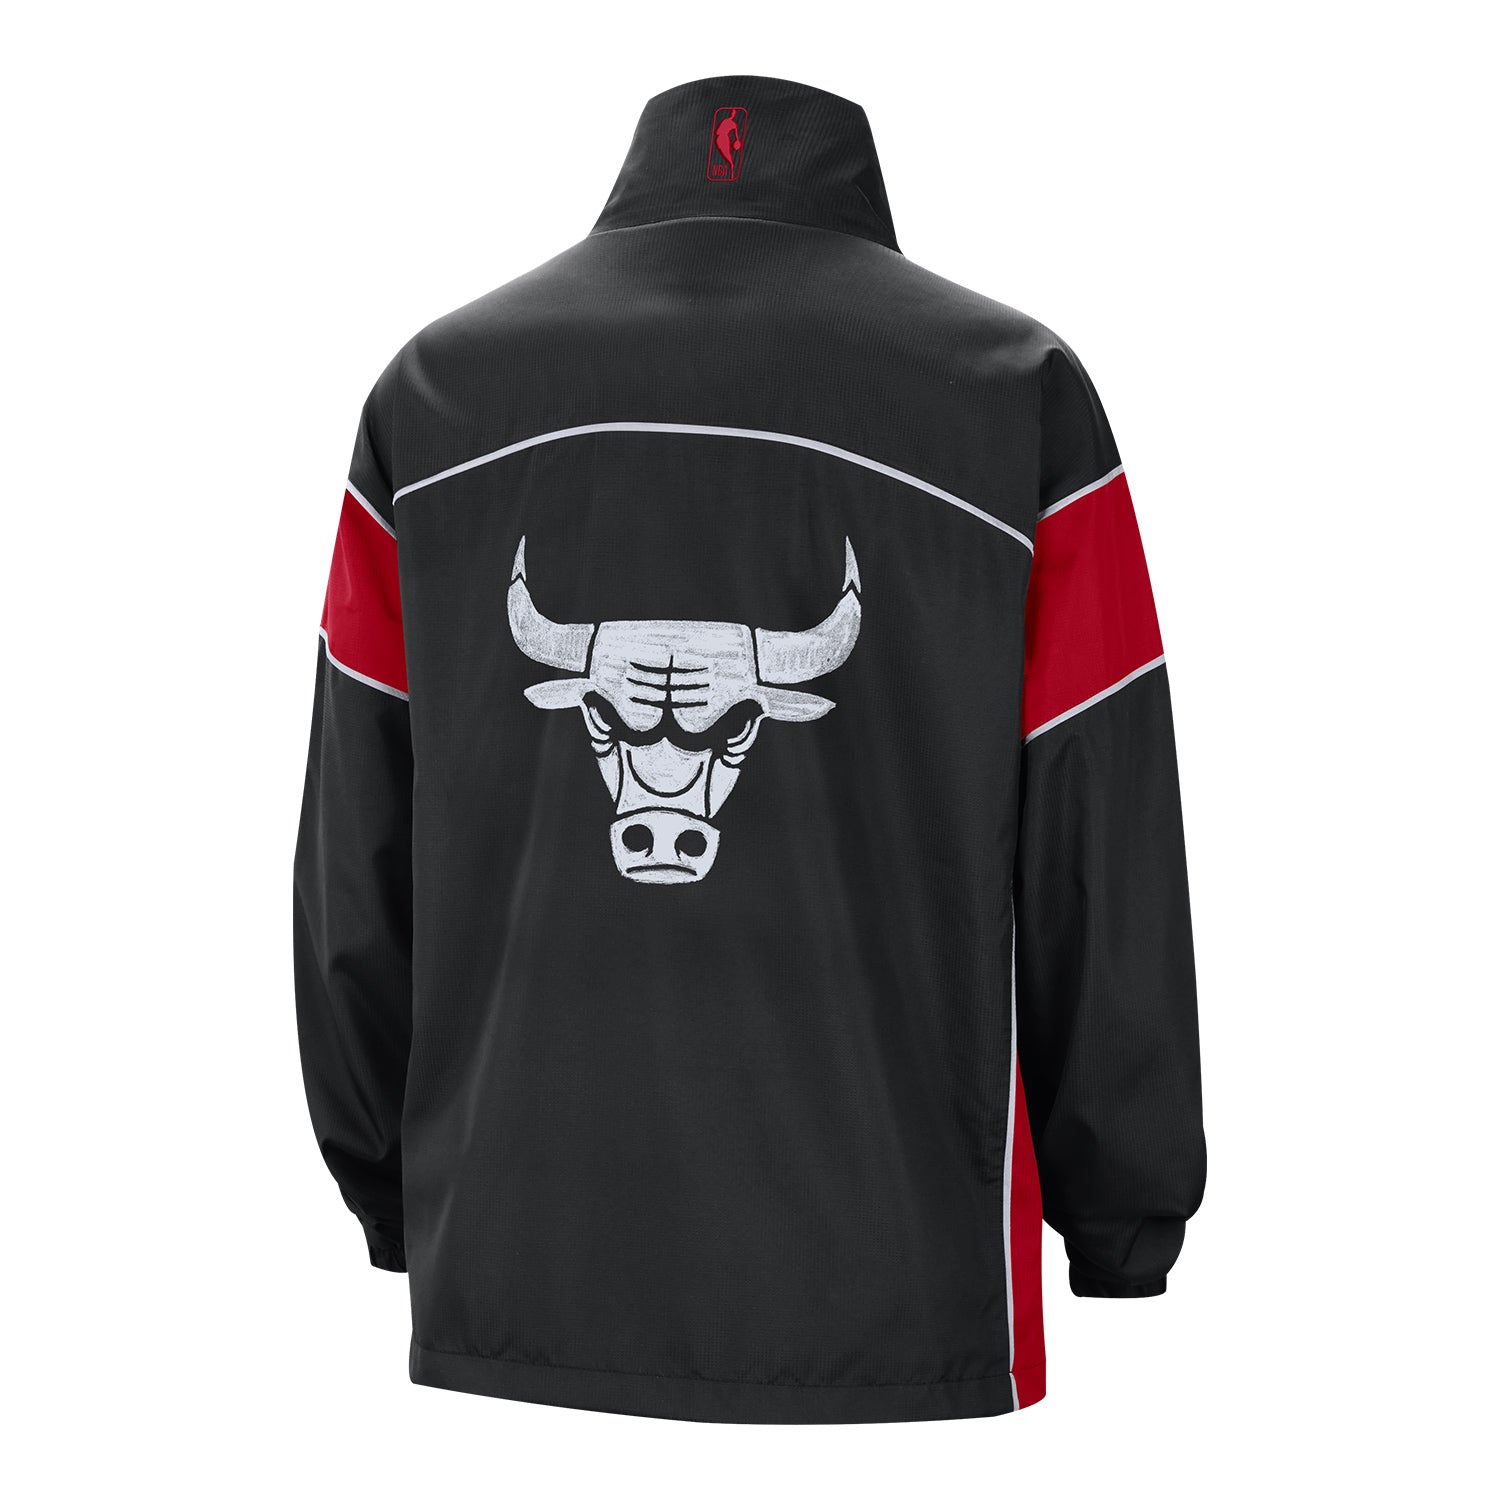 Ladies Chicago Bulls City Edition Nike Swoosh Fly Full-Zip Jacket - back view